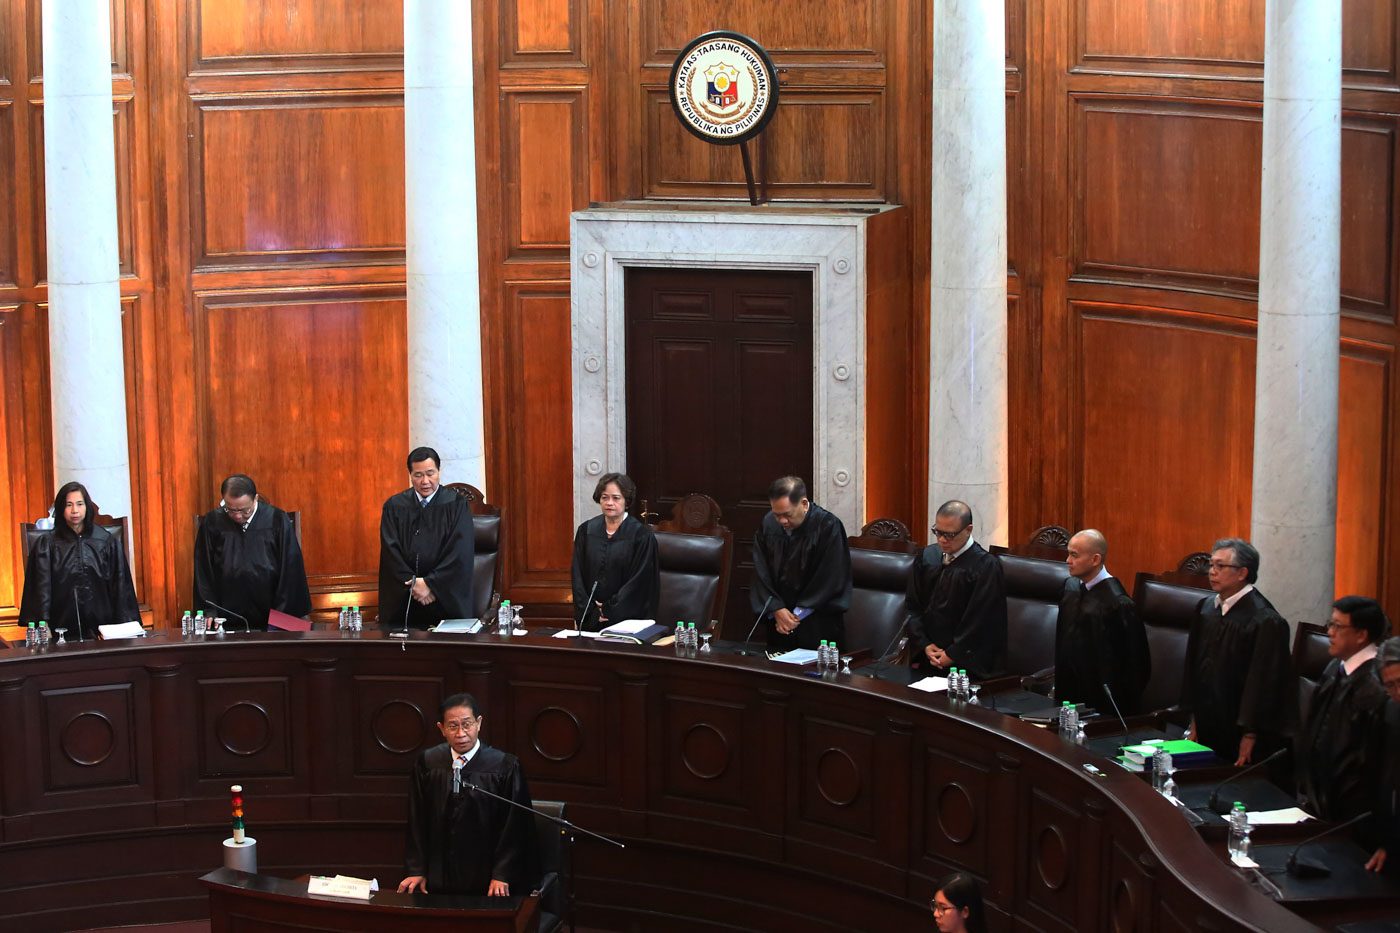 EN BANC. The justices of the Supreme Court in the session hall where oral arguments are held. File photo by Ben Nabong/Rappler 